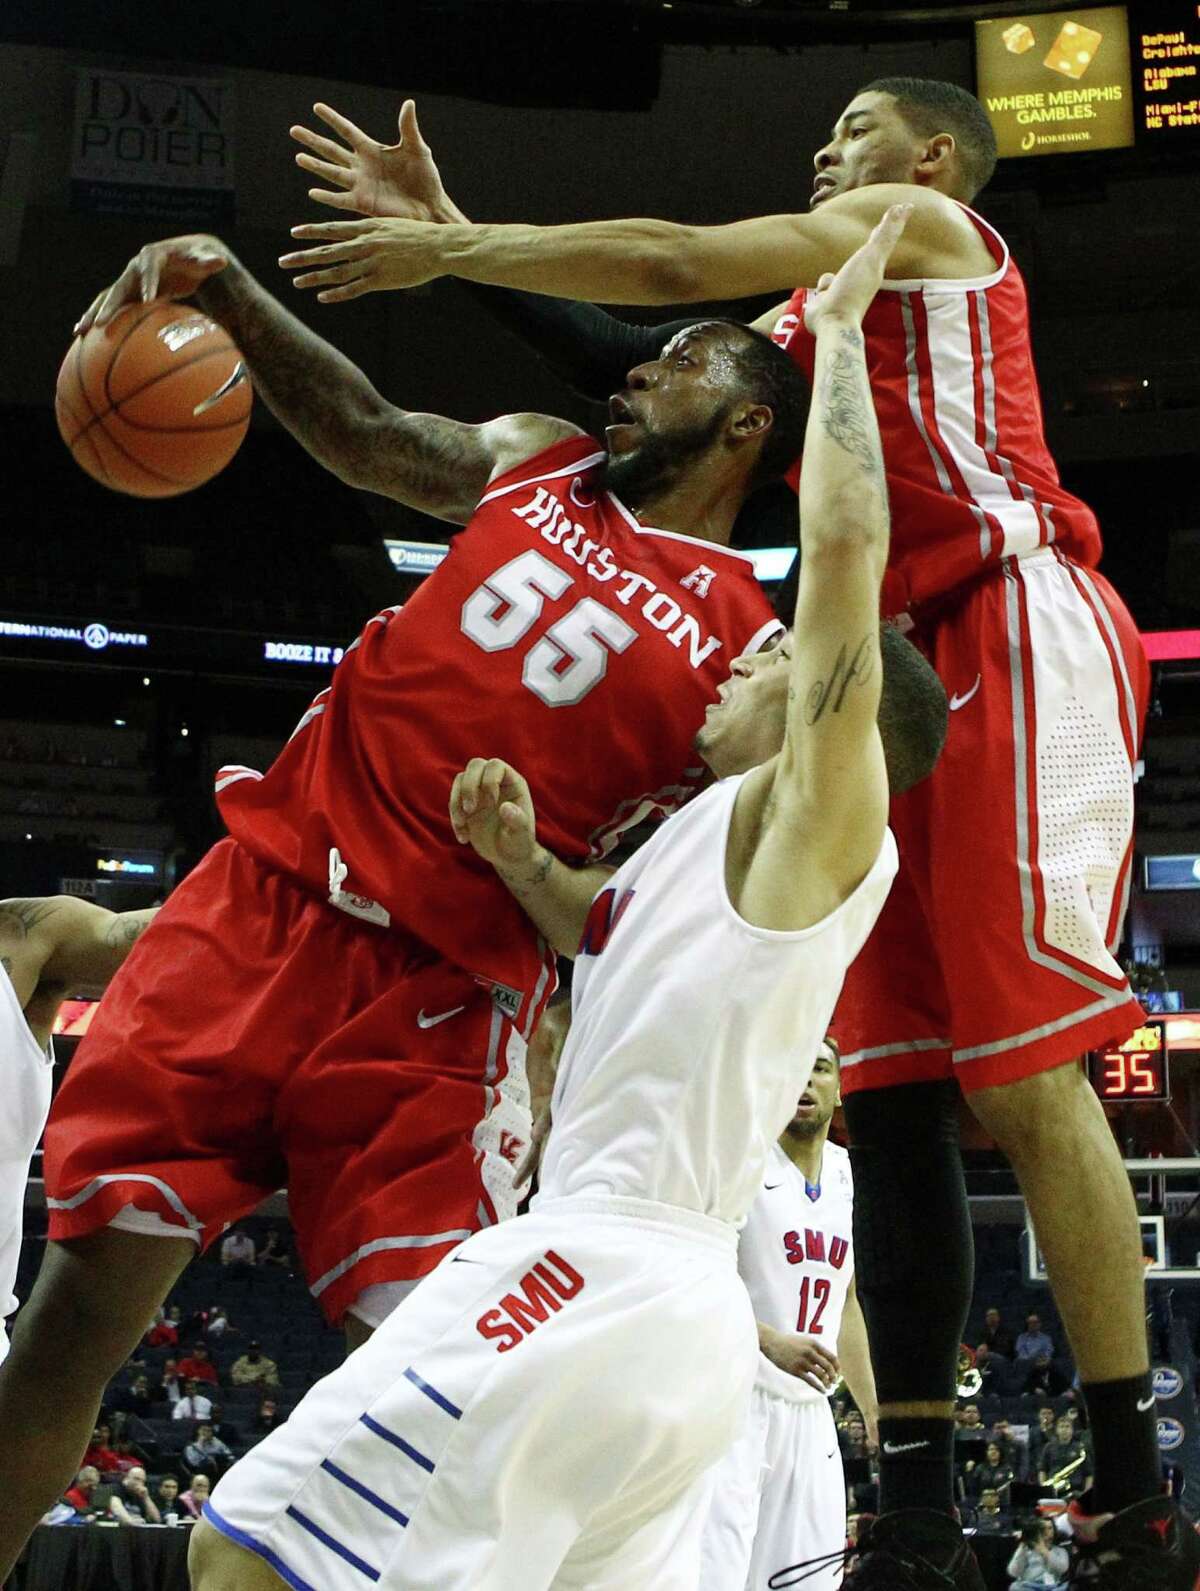 Houston Cougars forward J.J. Richardson (left), SMU Mustangs guard Nic Moore (center) and Houston Cougars guard LeRon Barnes (right) battle for a rebound during the quaterfinals of the American Athletic Conference tournament at FedExForum, March 13, 2014 in Memphis, Tenn. (Mike Brown/The Commercial Appeal/MCT)